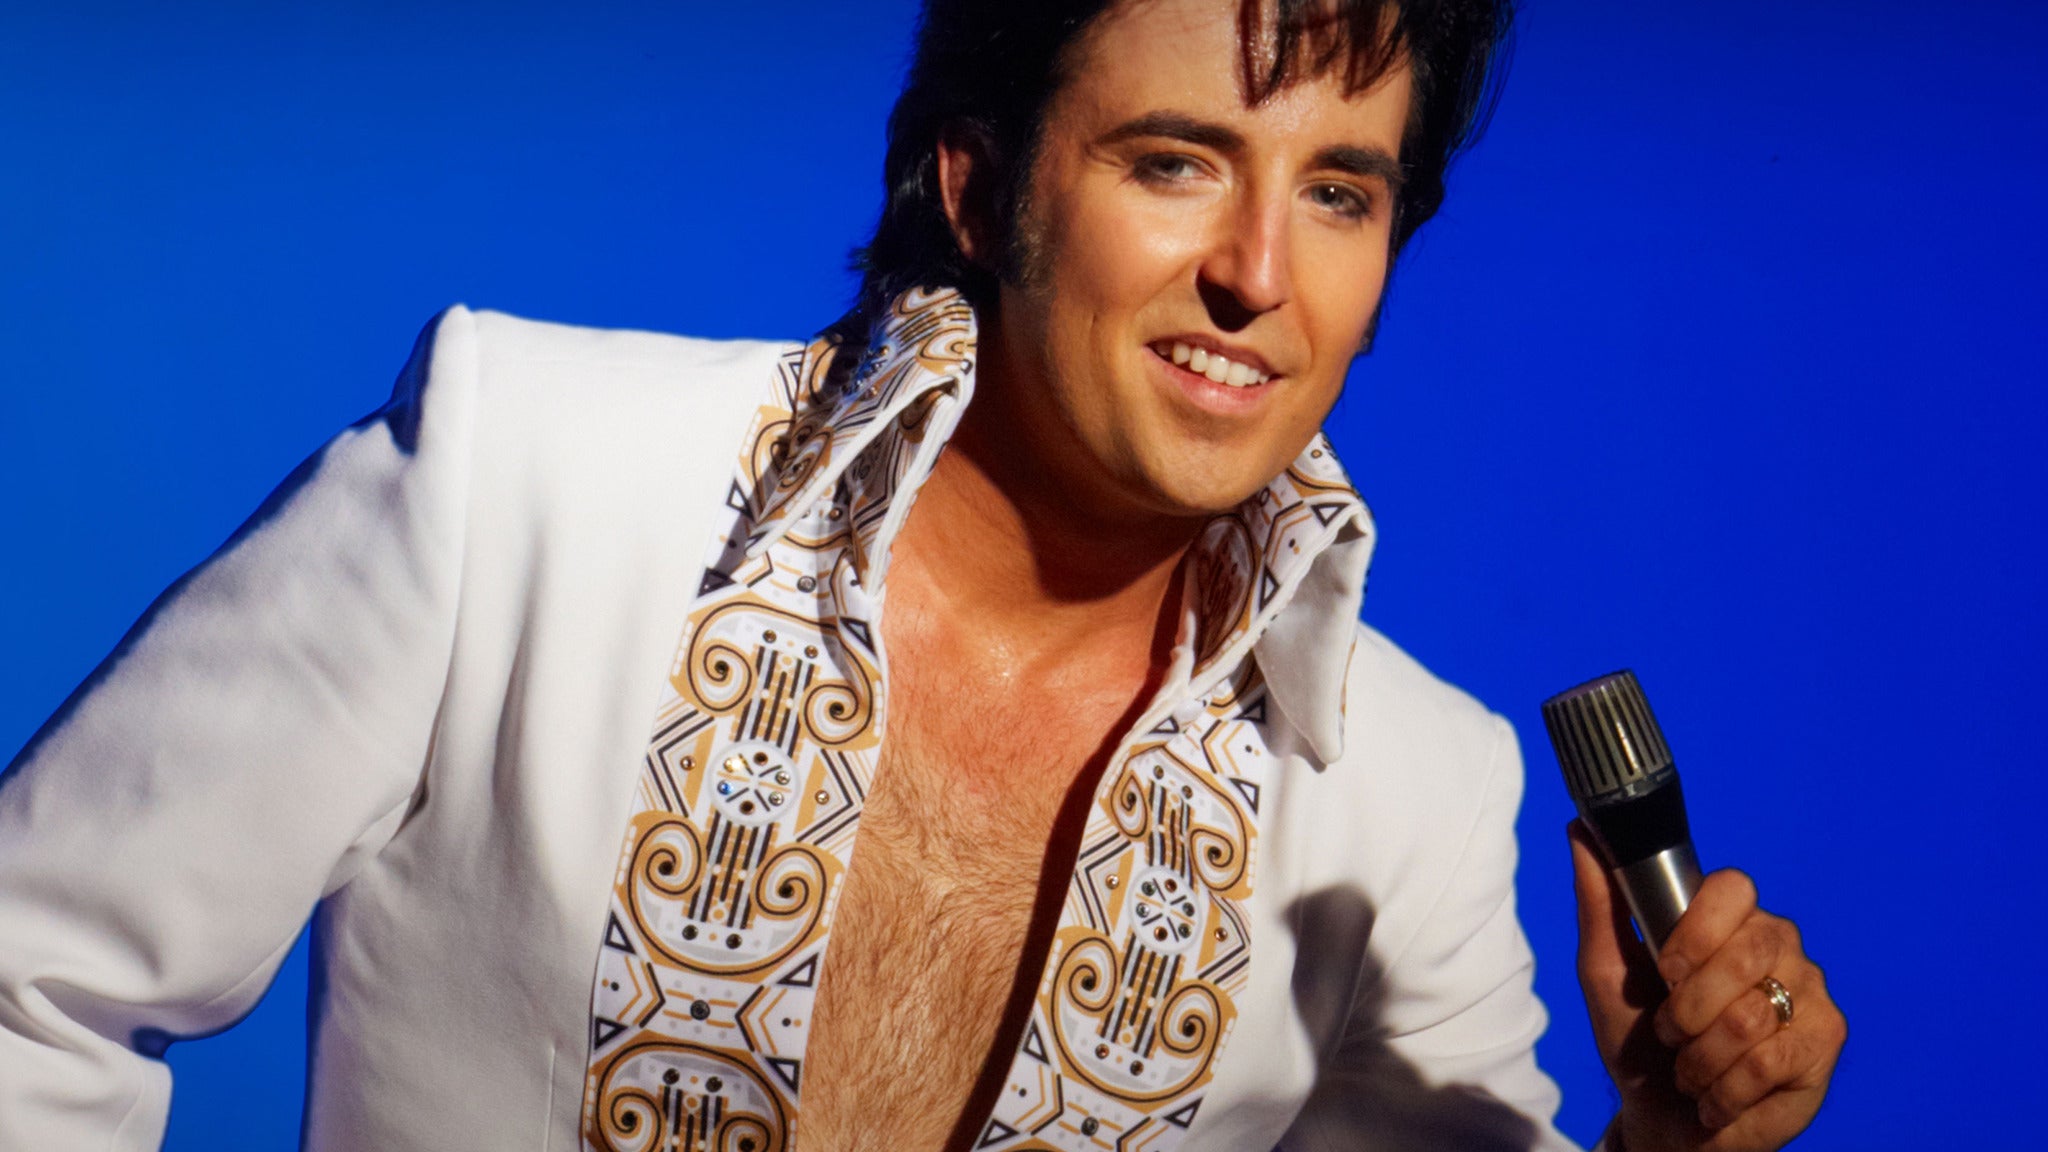 Image used with permission from Ticketmaster | The Elvis Concert - Starring Pete Paquette tickets